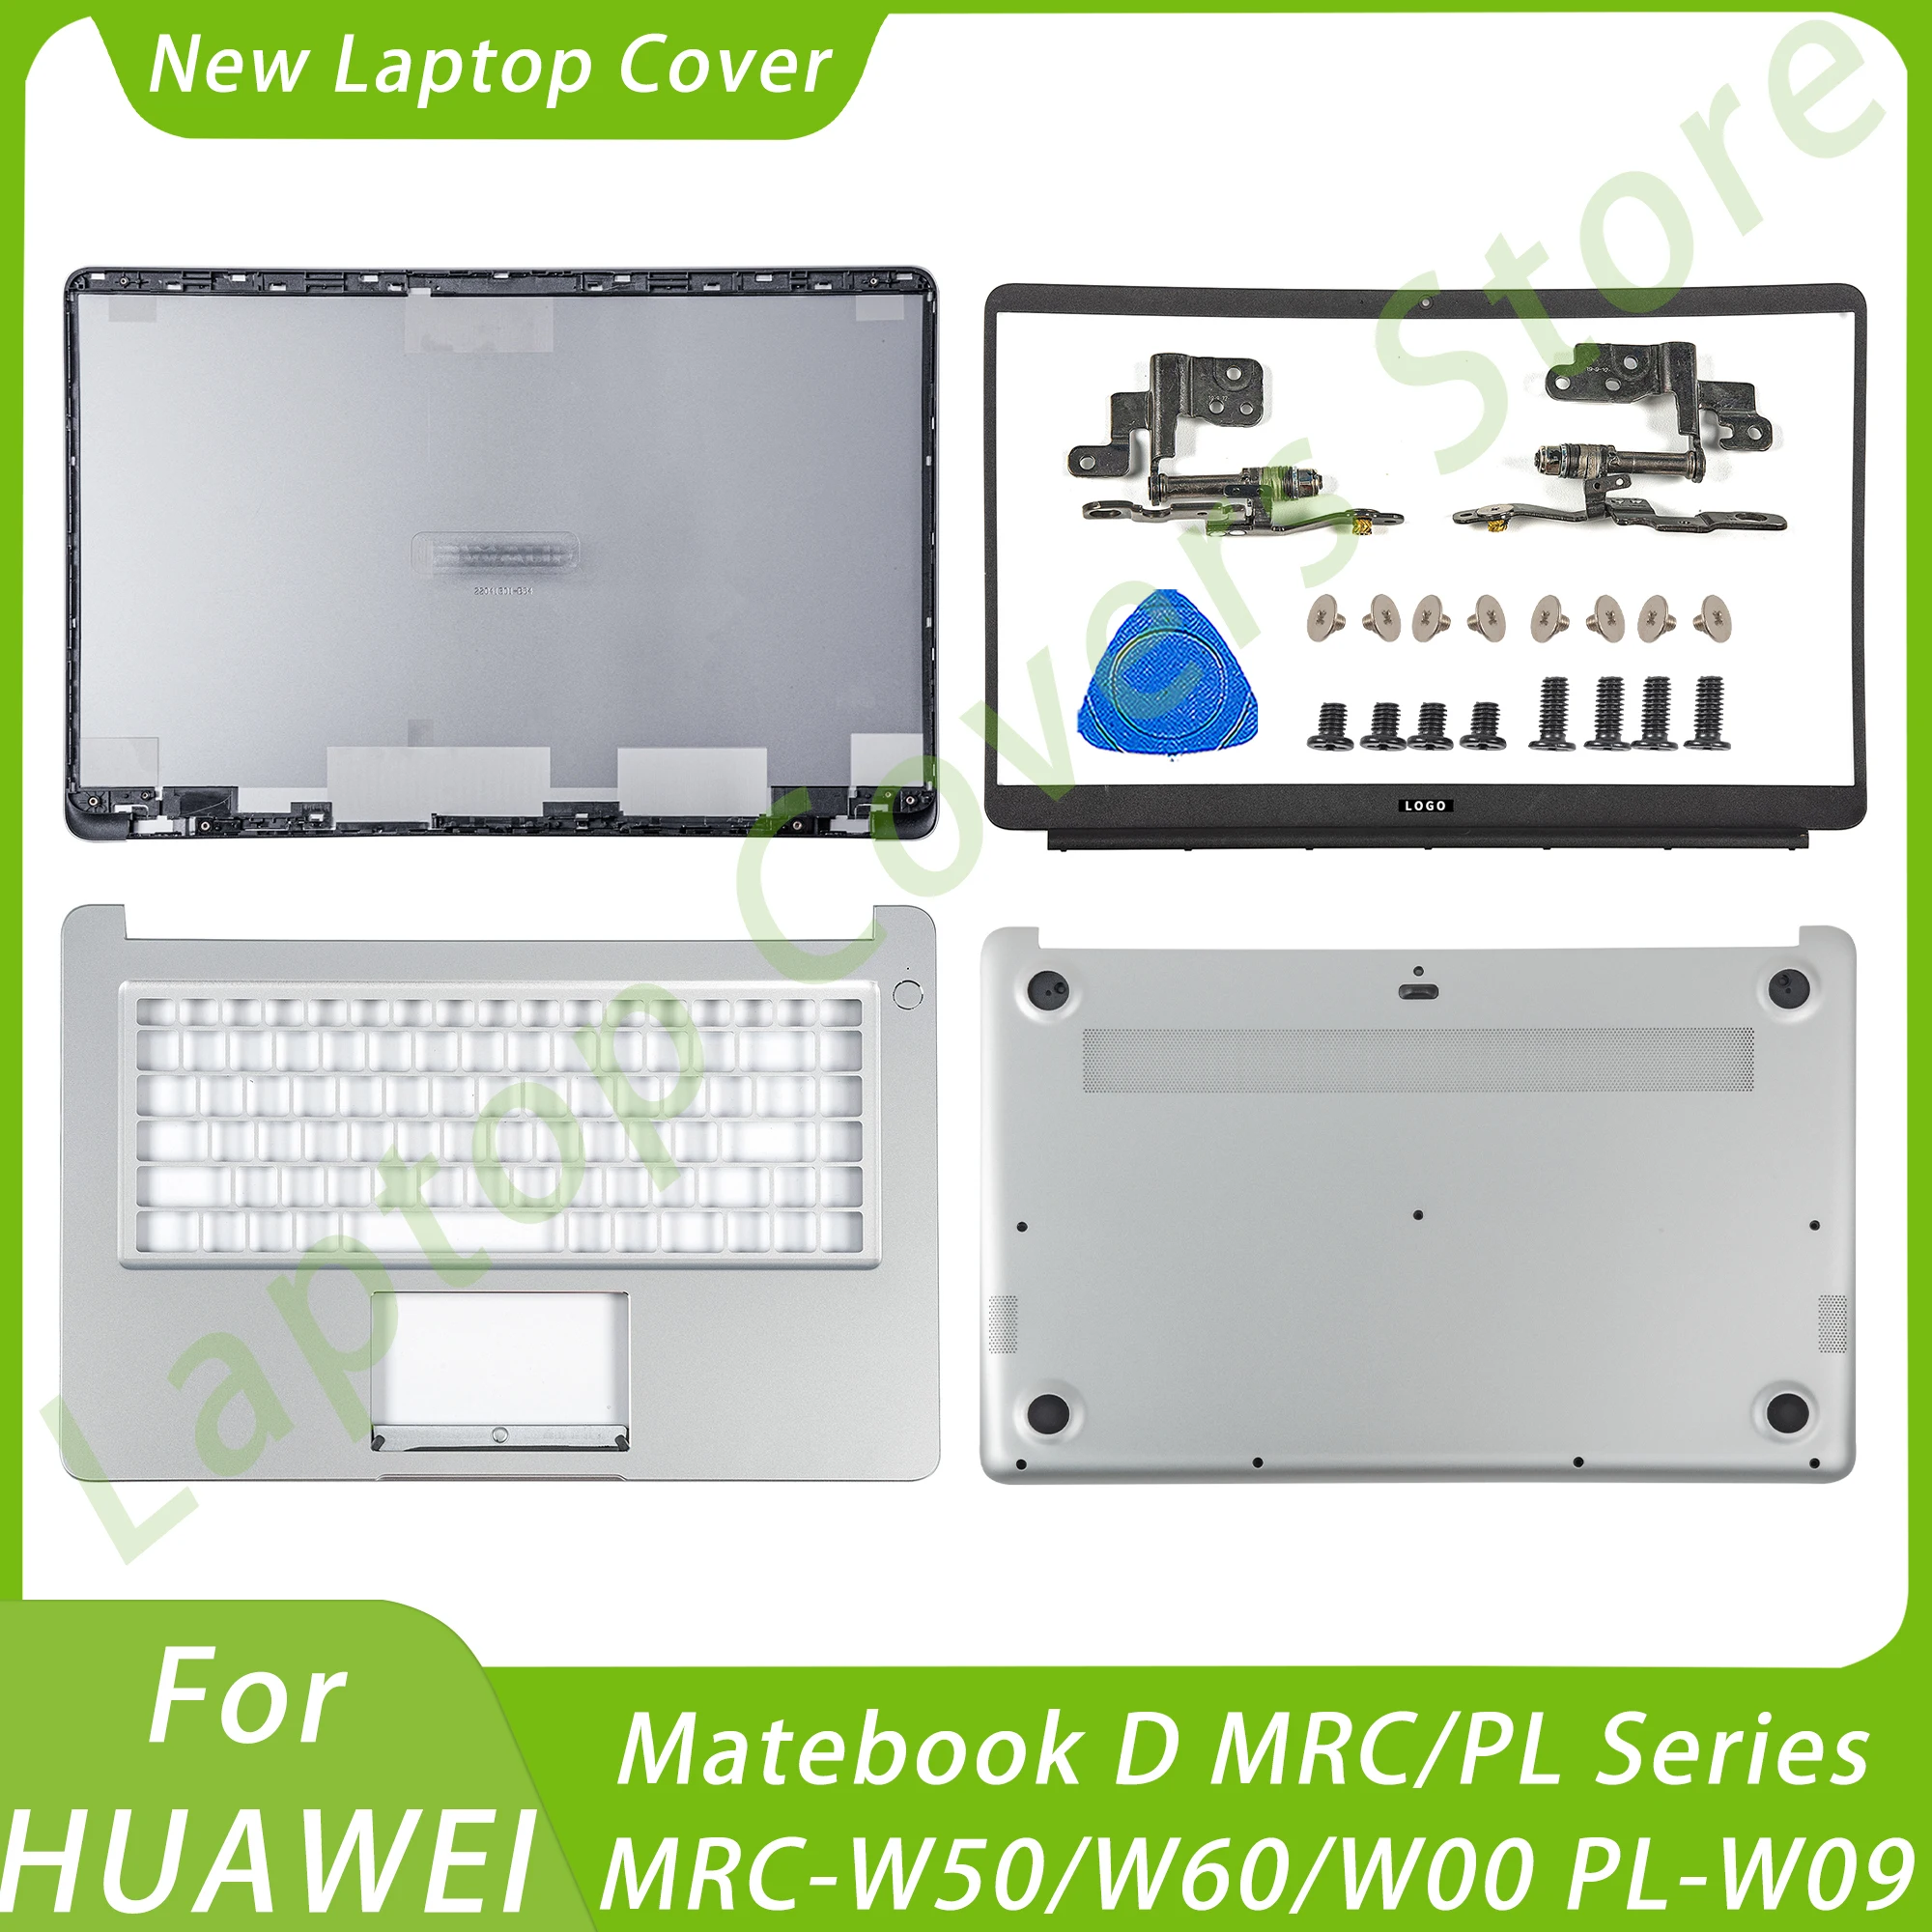 

New Laptop Covers For HUAWEI Matebook D MRC/PL Series MRC-W50/W60/W00 PL-W09 LCD Back Cover Front Bezel Hinges Top Replace